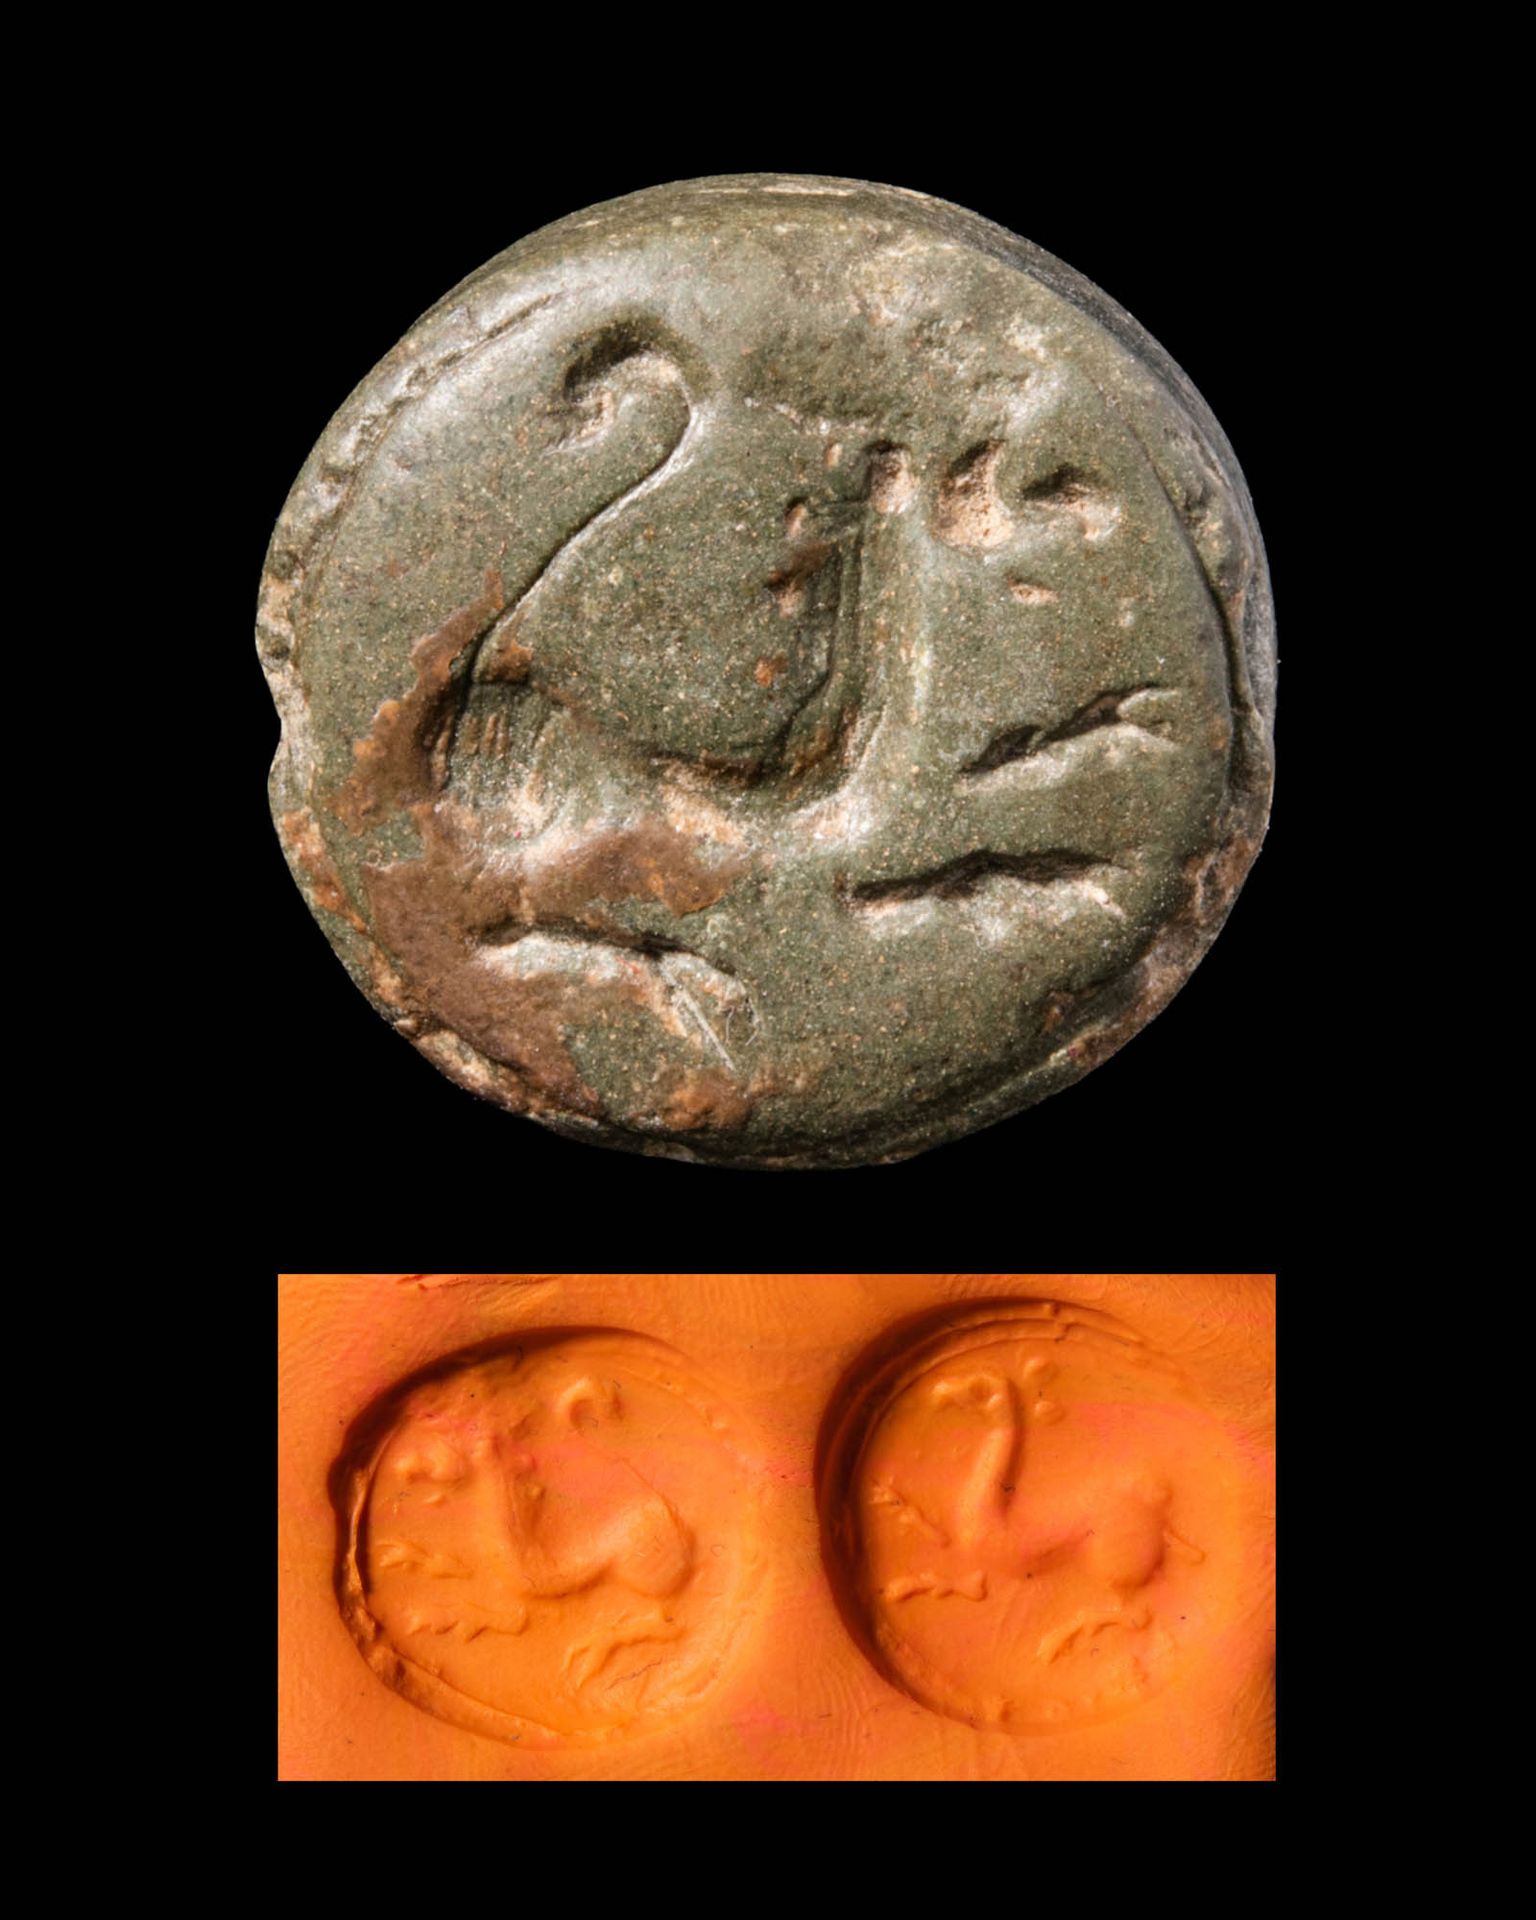 BACTRIAN DOUBLE STAMP SEAL Ca. 1st millennium BC.
A Bactrian green stone double &hellip;